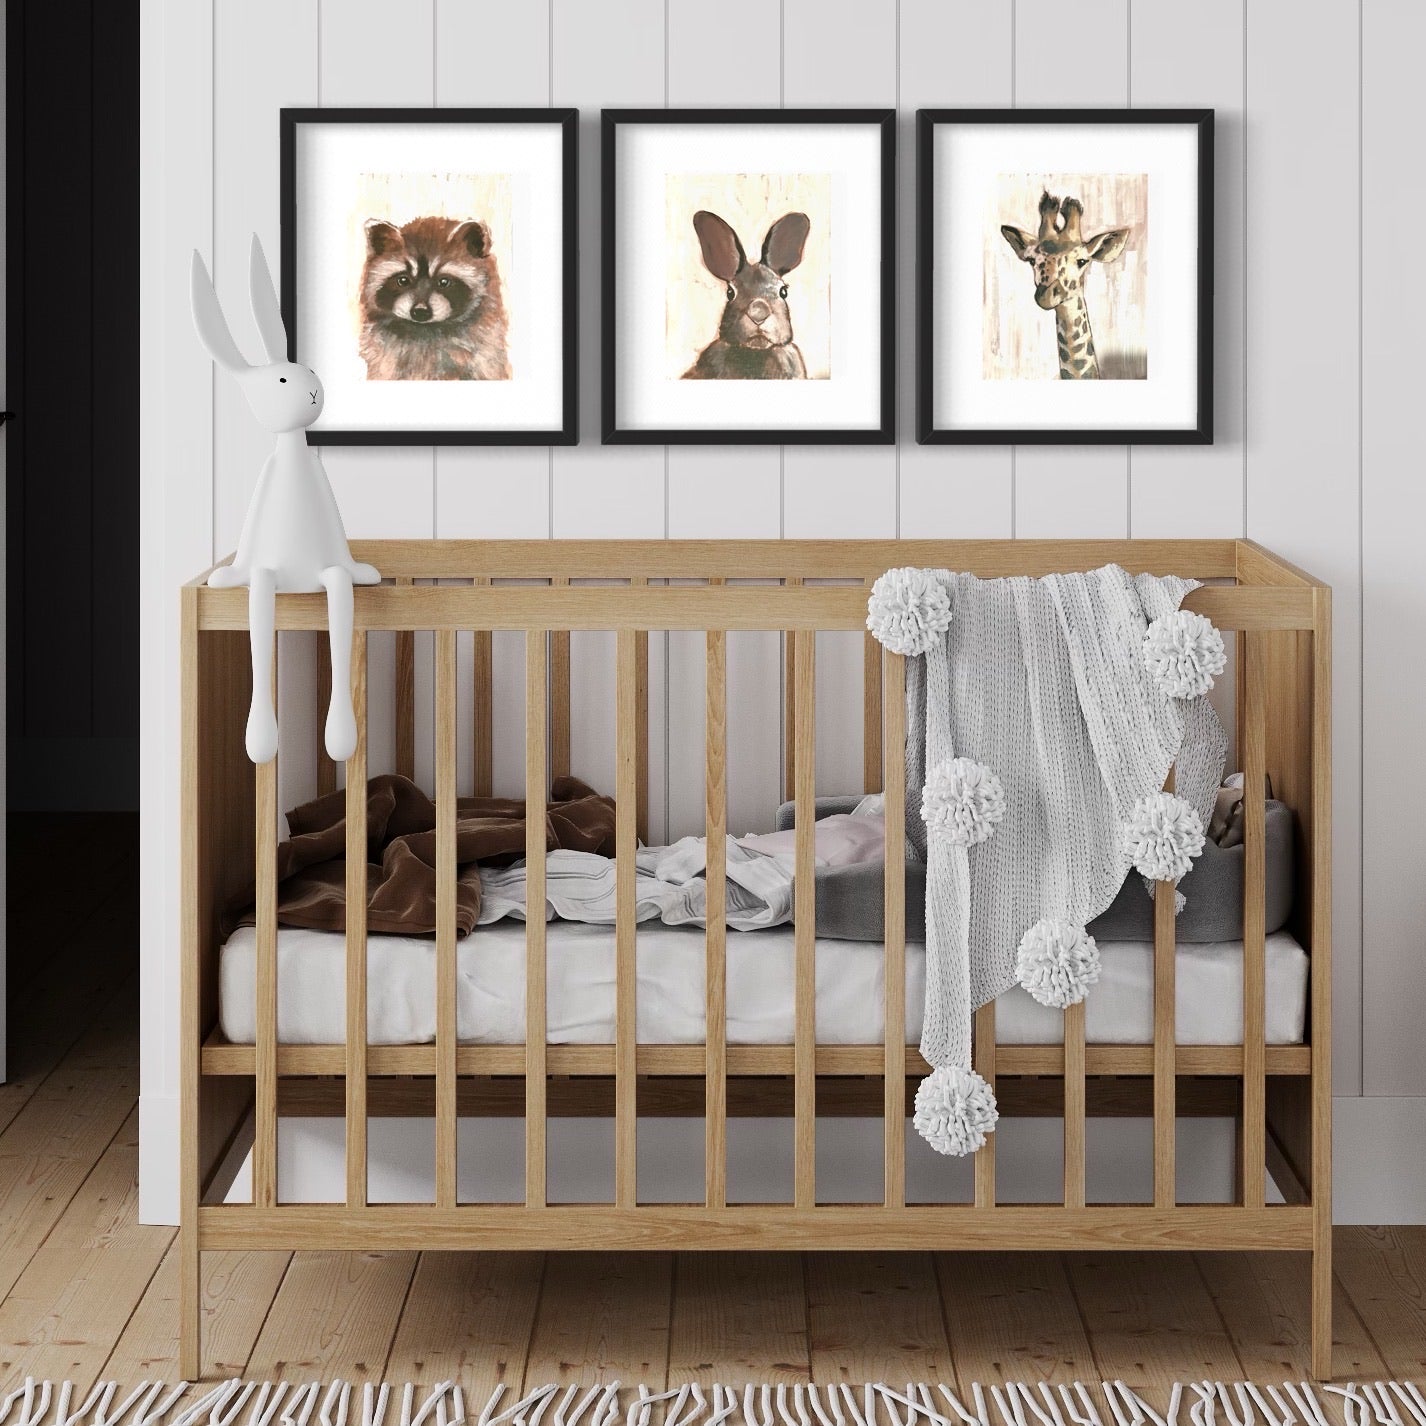 Crib with 3 nursery images above it. 